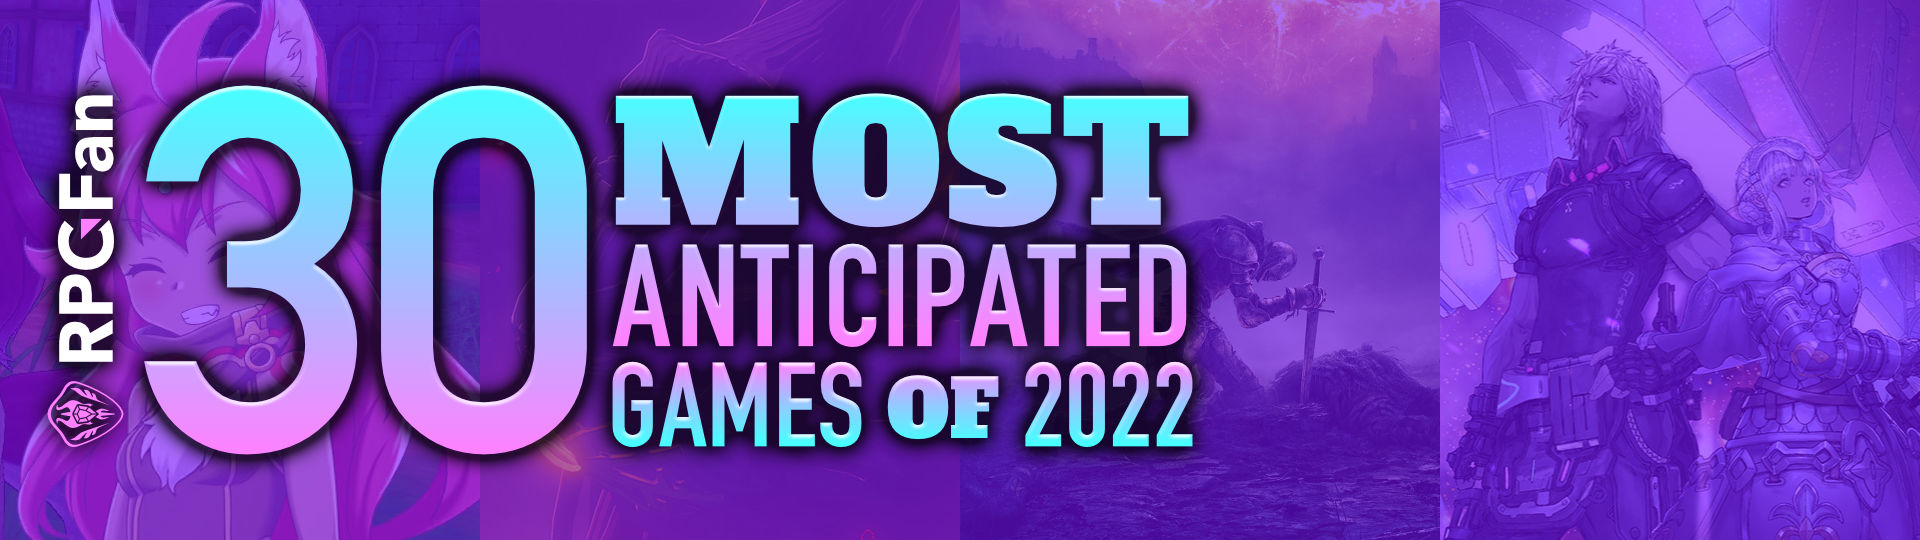 Most Anticipated Games of 2022 Featured Narrow